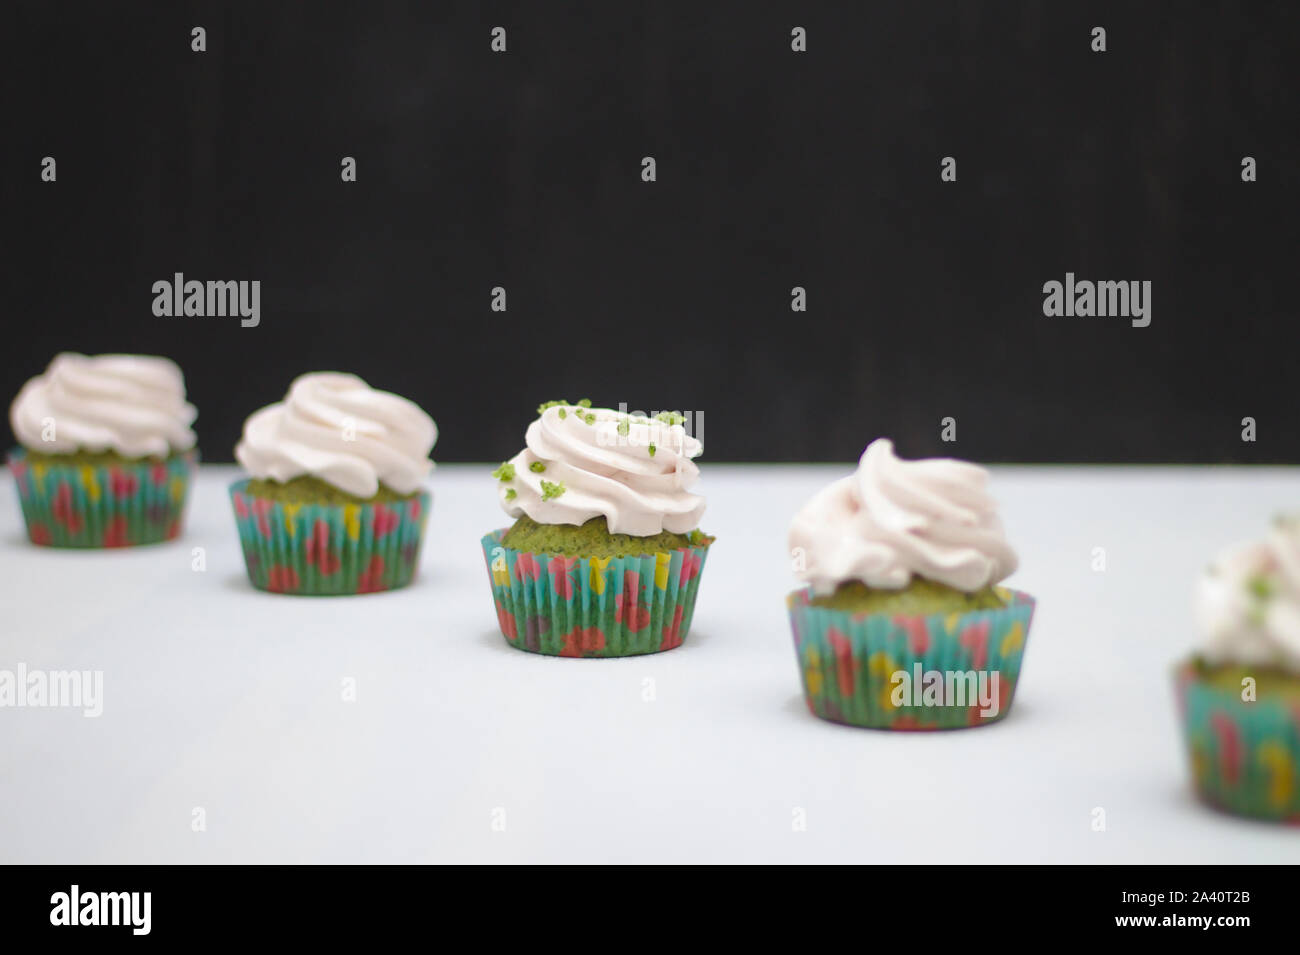 https://c8.alamy.com/comp/2A40T2B/green-cupcakes-with-cream-hat-in-multi-colored-papers-on-a-white-table-on-a-dark-background-focus-on-cake-depth-of-field-effect-2A40T2B.jpg